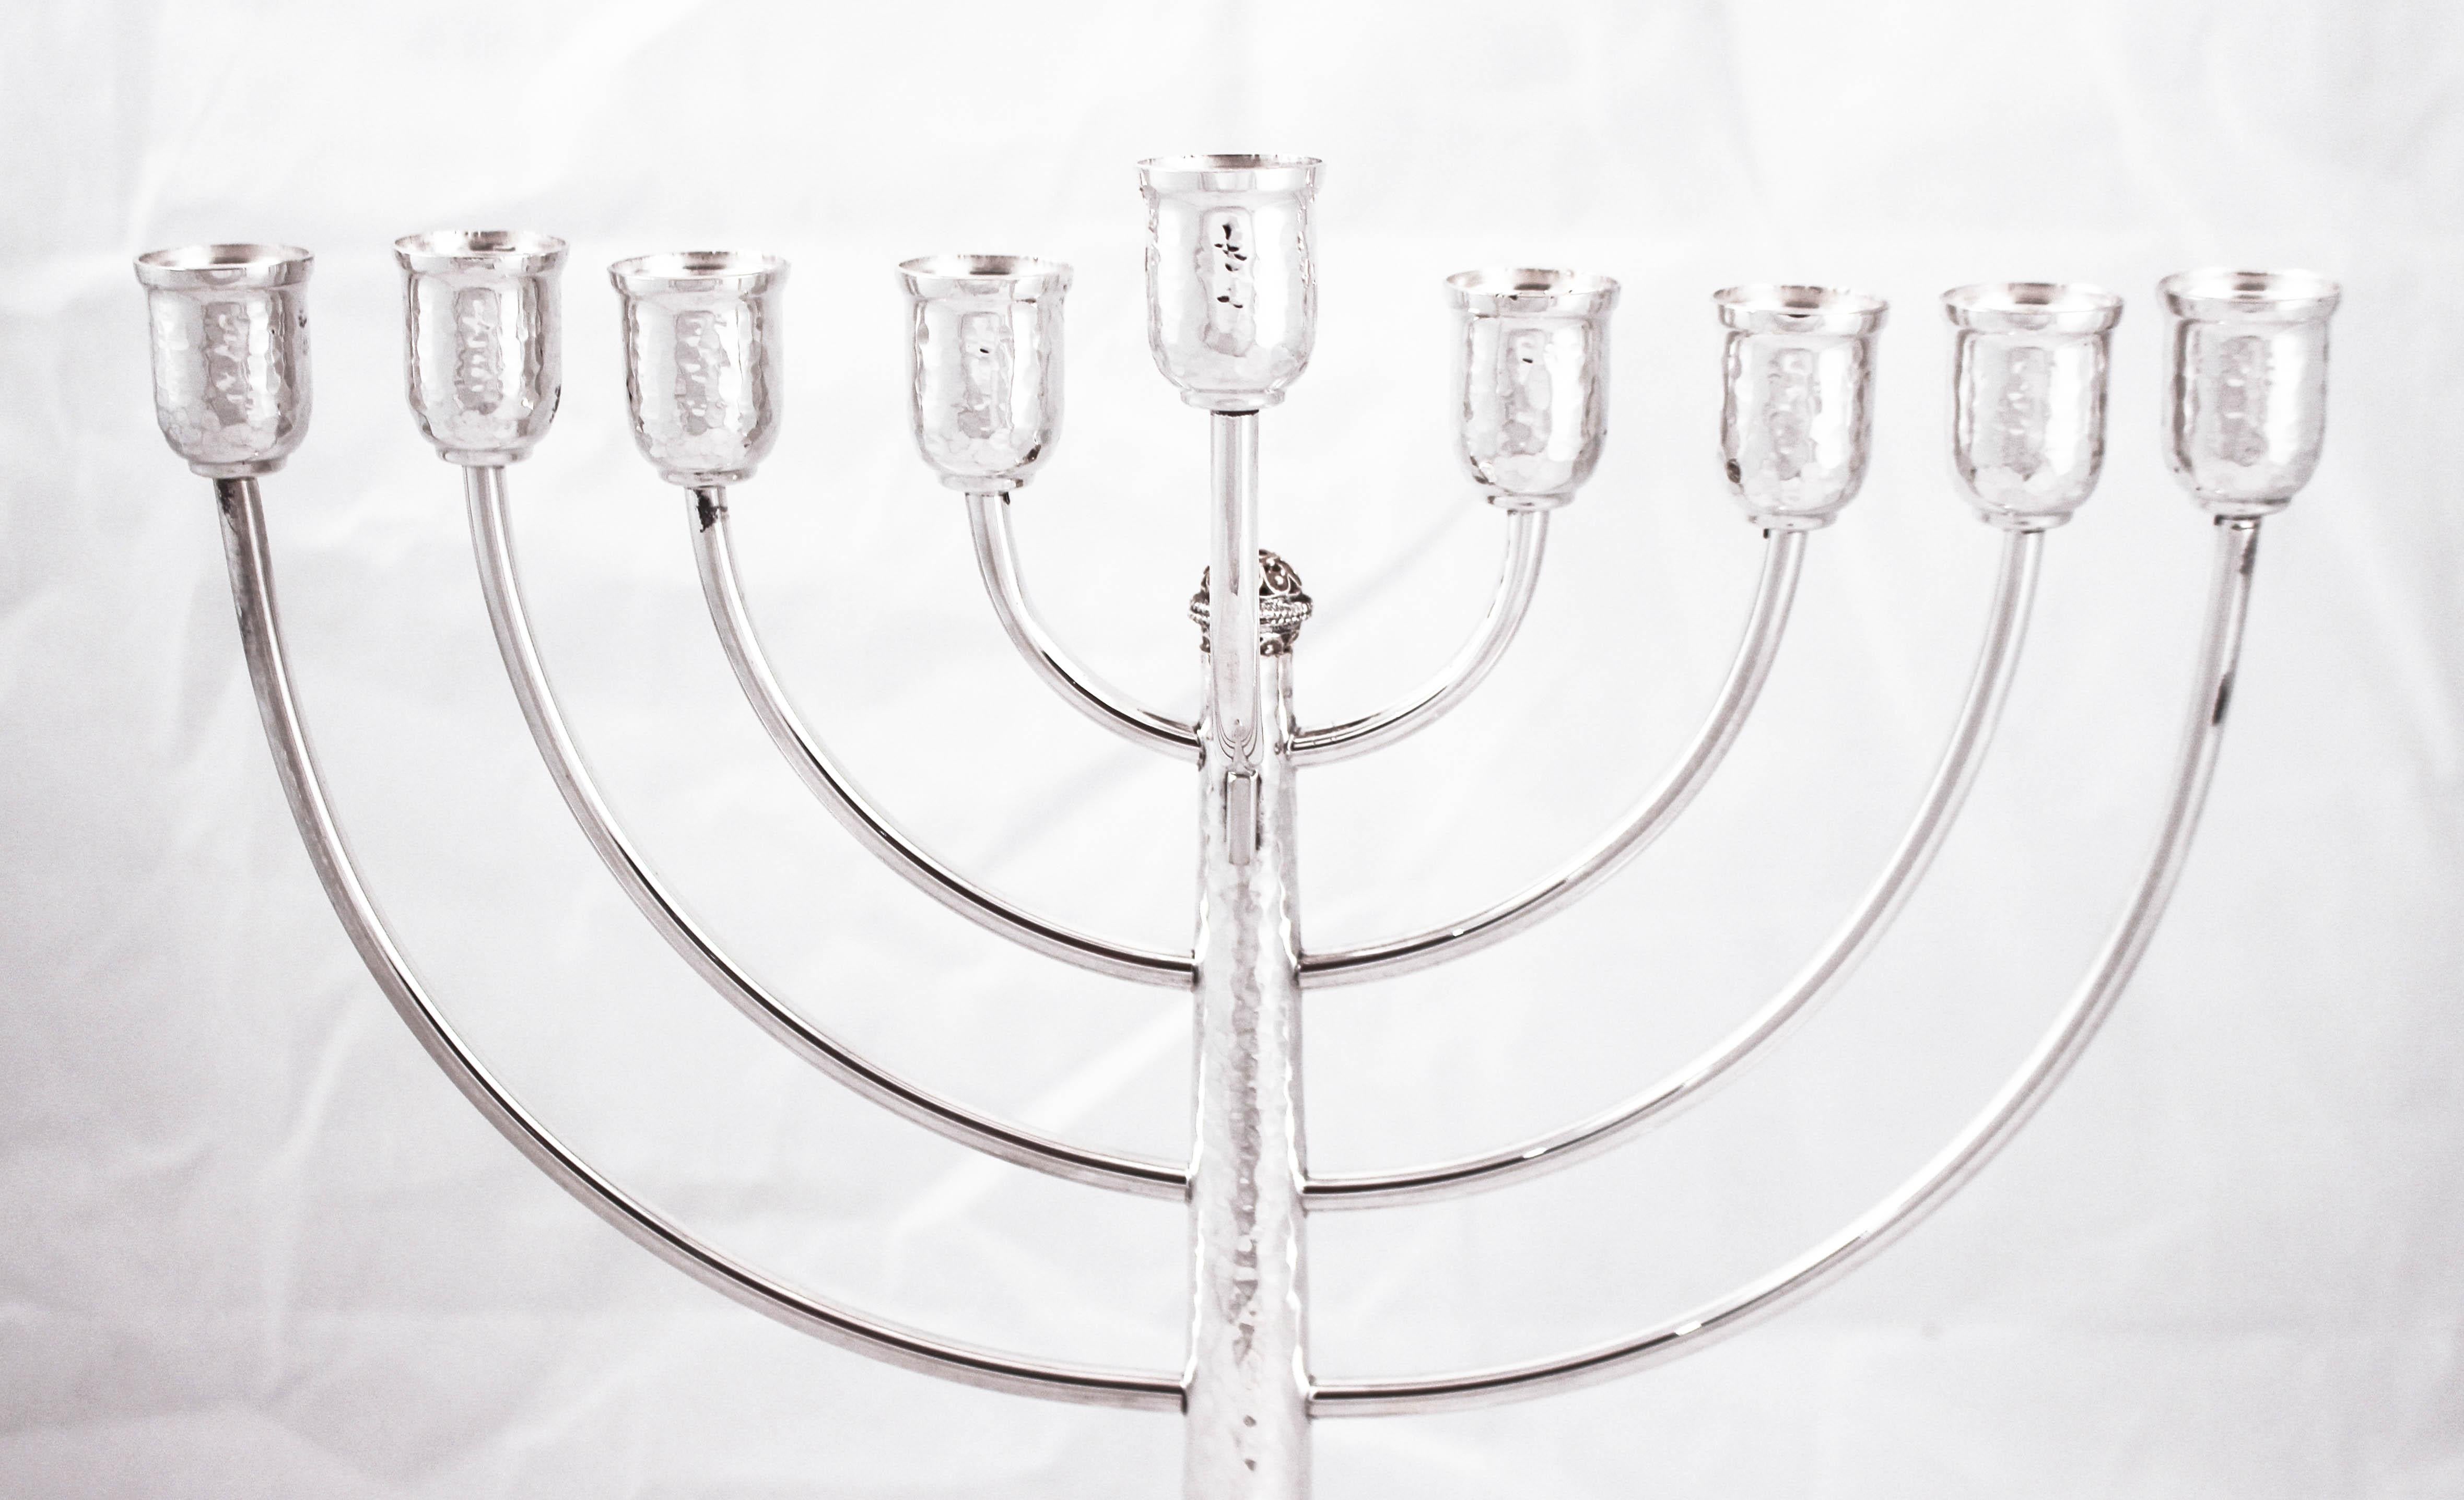 We are delighted to offer this sterling silver menorah that is made in Israel. The festival of lights, as Hanukkah is often referred to is commentated by the lighting of the menorah each of the eight nights of the holiday. What a beautiful way to